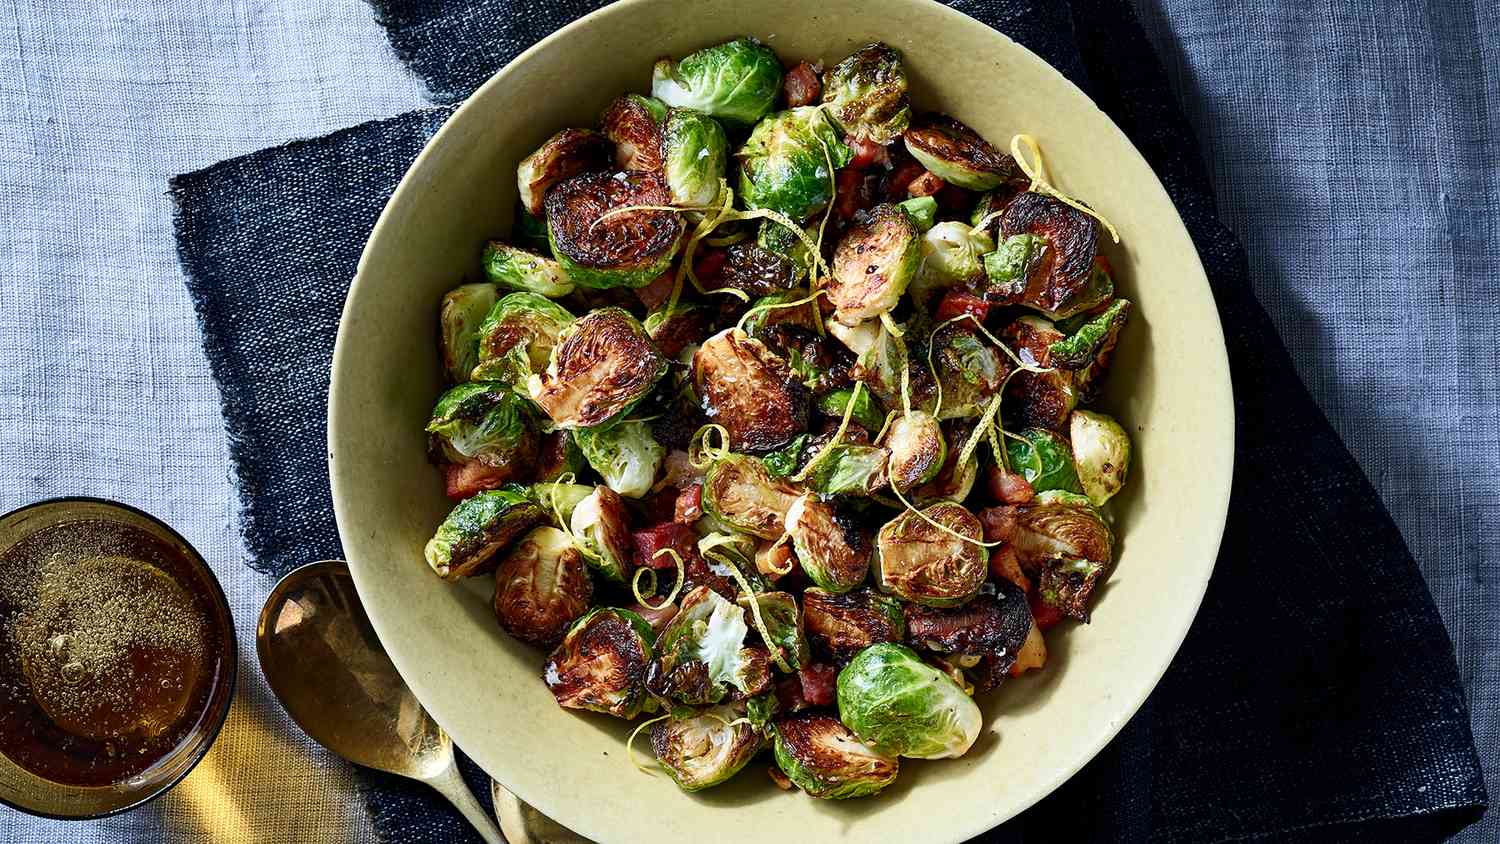 Top View of Roasted Brussels Sprouts With Pancetta Served in a White Bowl on Top of Blue Fabric, with Metal Spoon and Small Metal Bowl of Peppered Oil to the Left